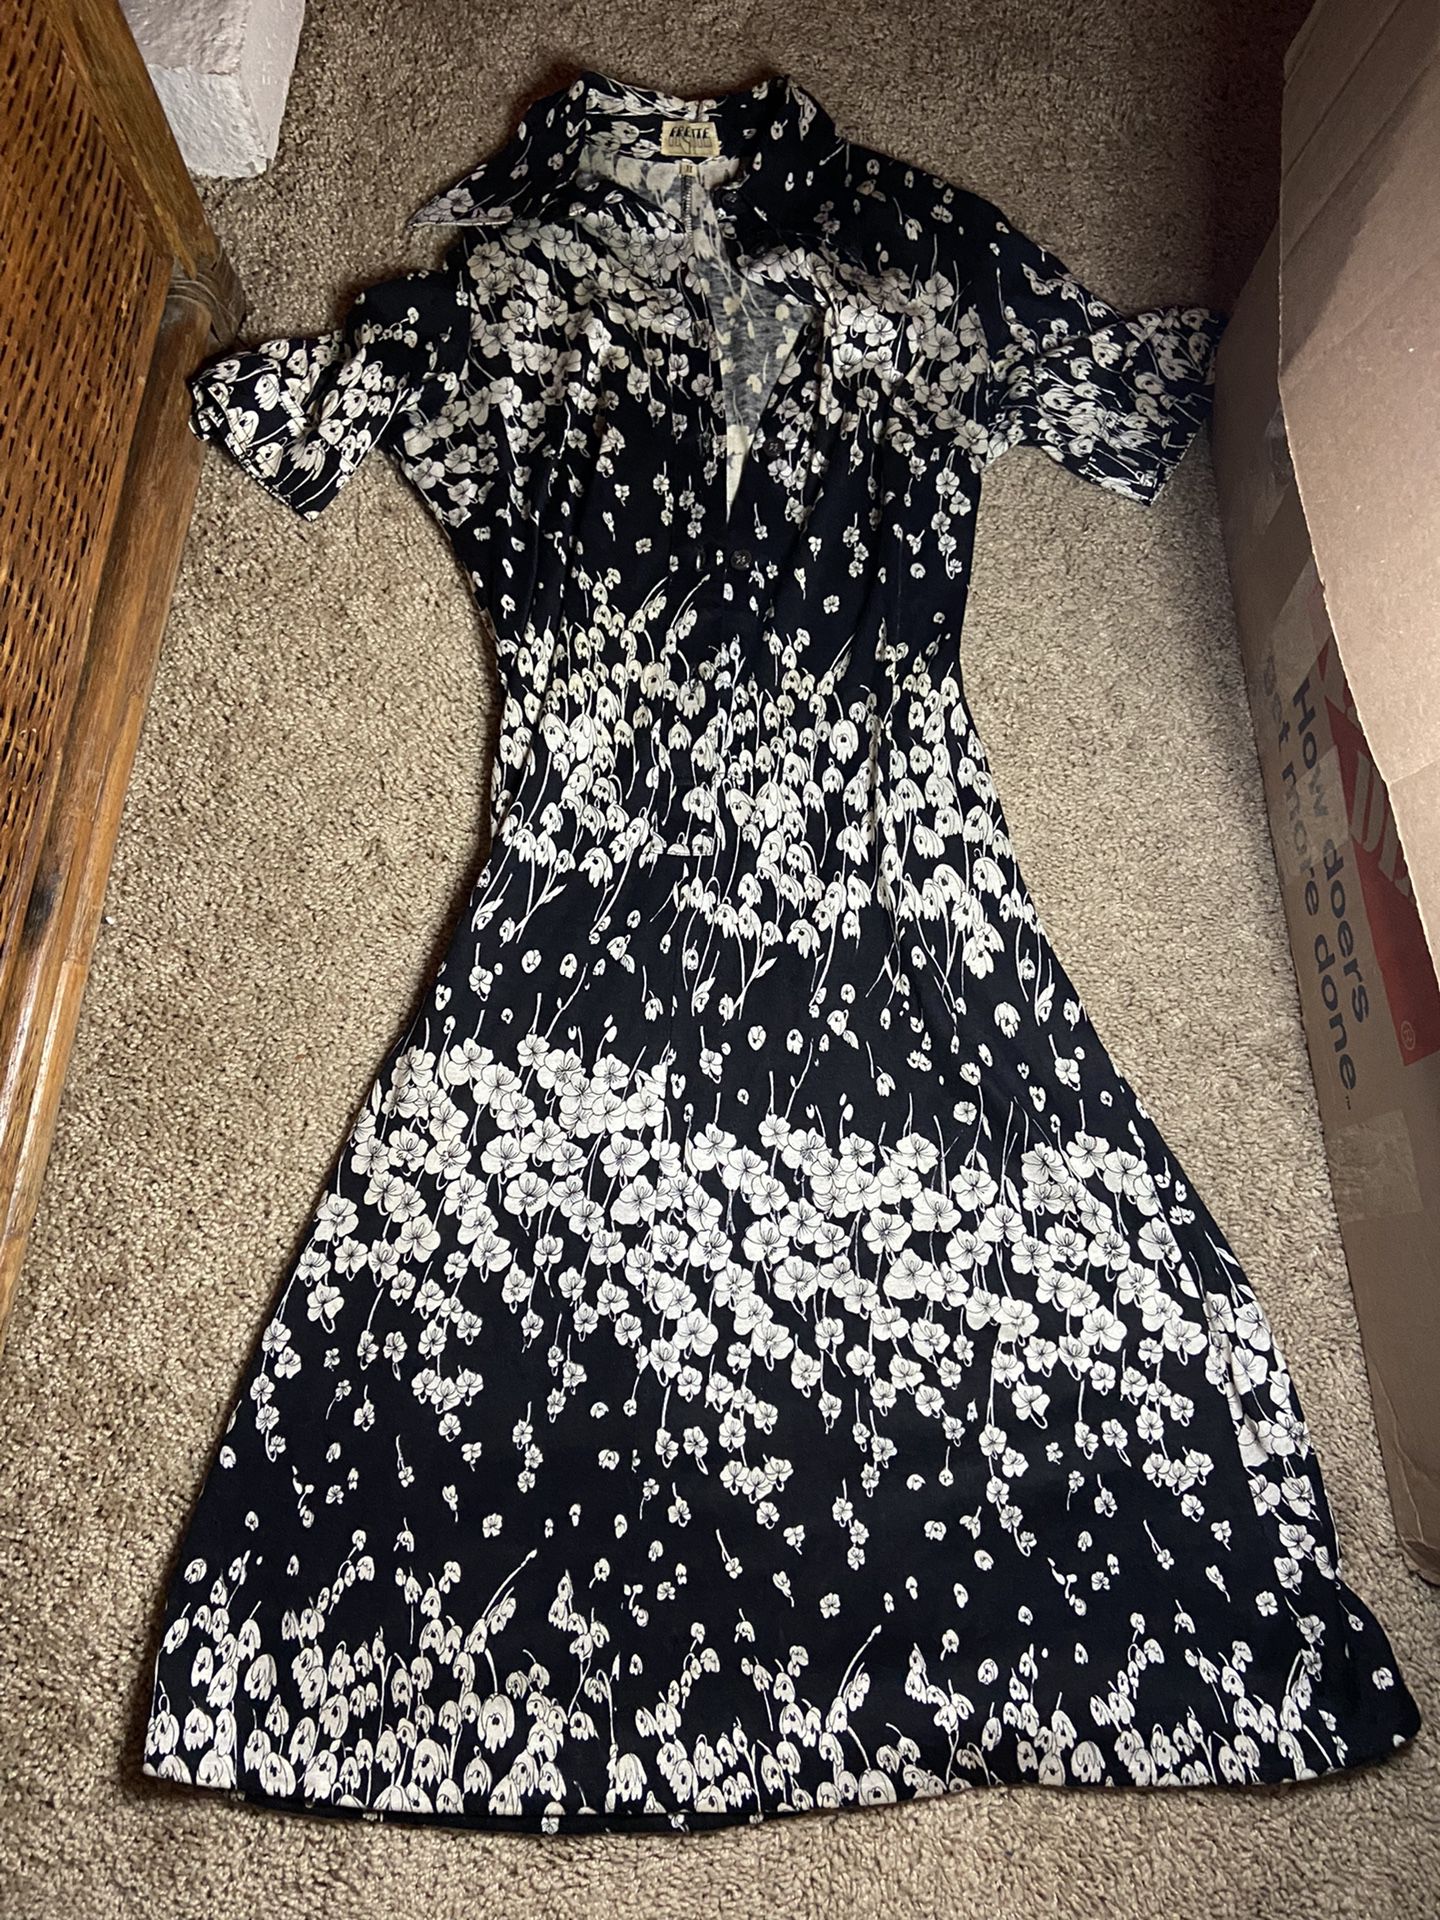 Black and white long flower dress from Italy!